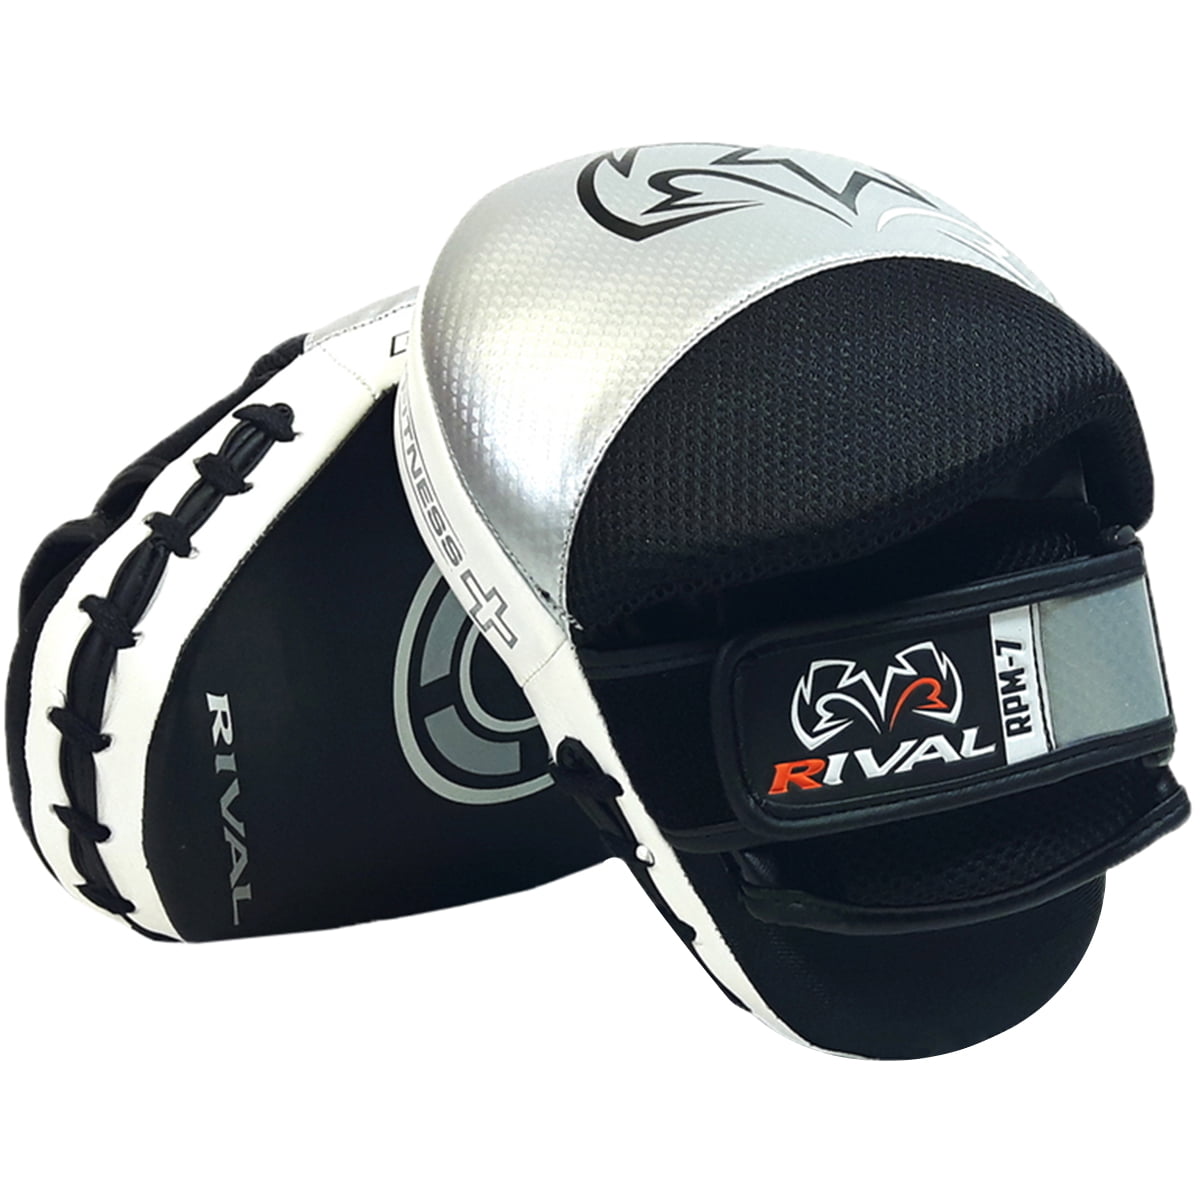 Boxing Punch Mitts Focus Pads Hook And Jab Target Coaching Rival RPM7 Fitness 